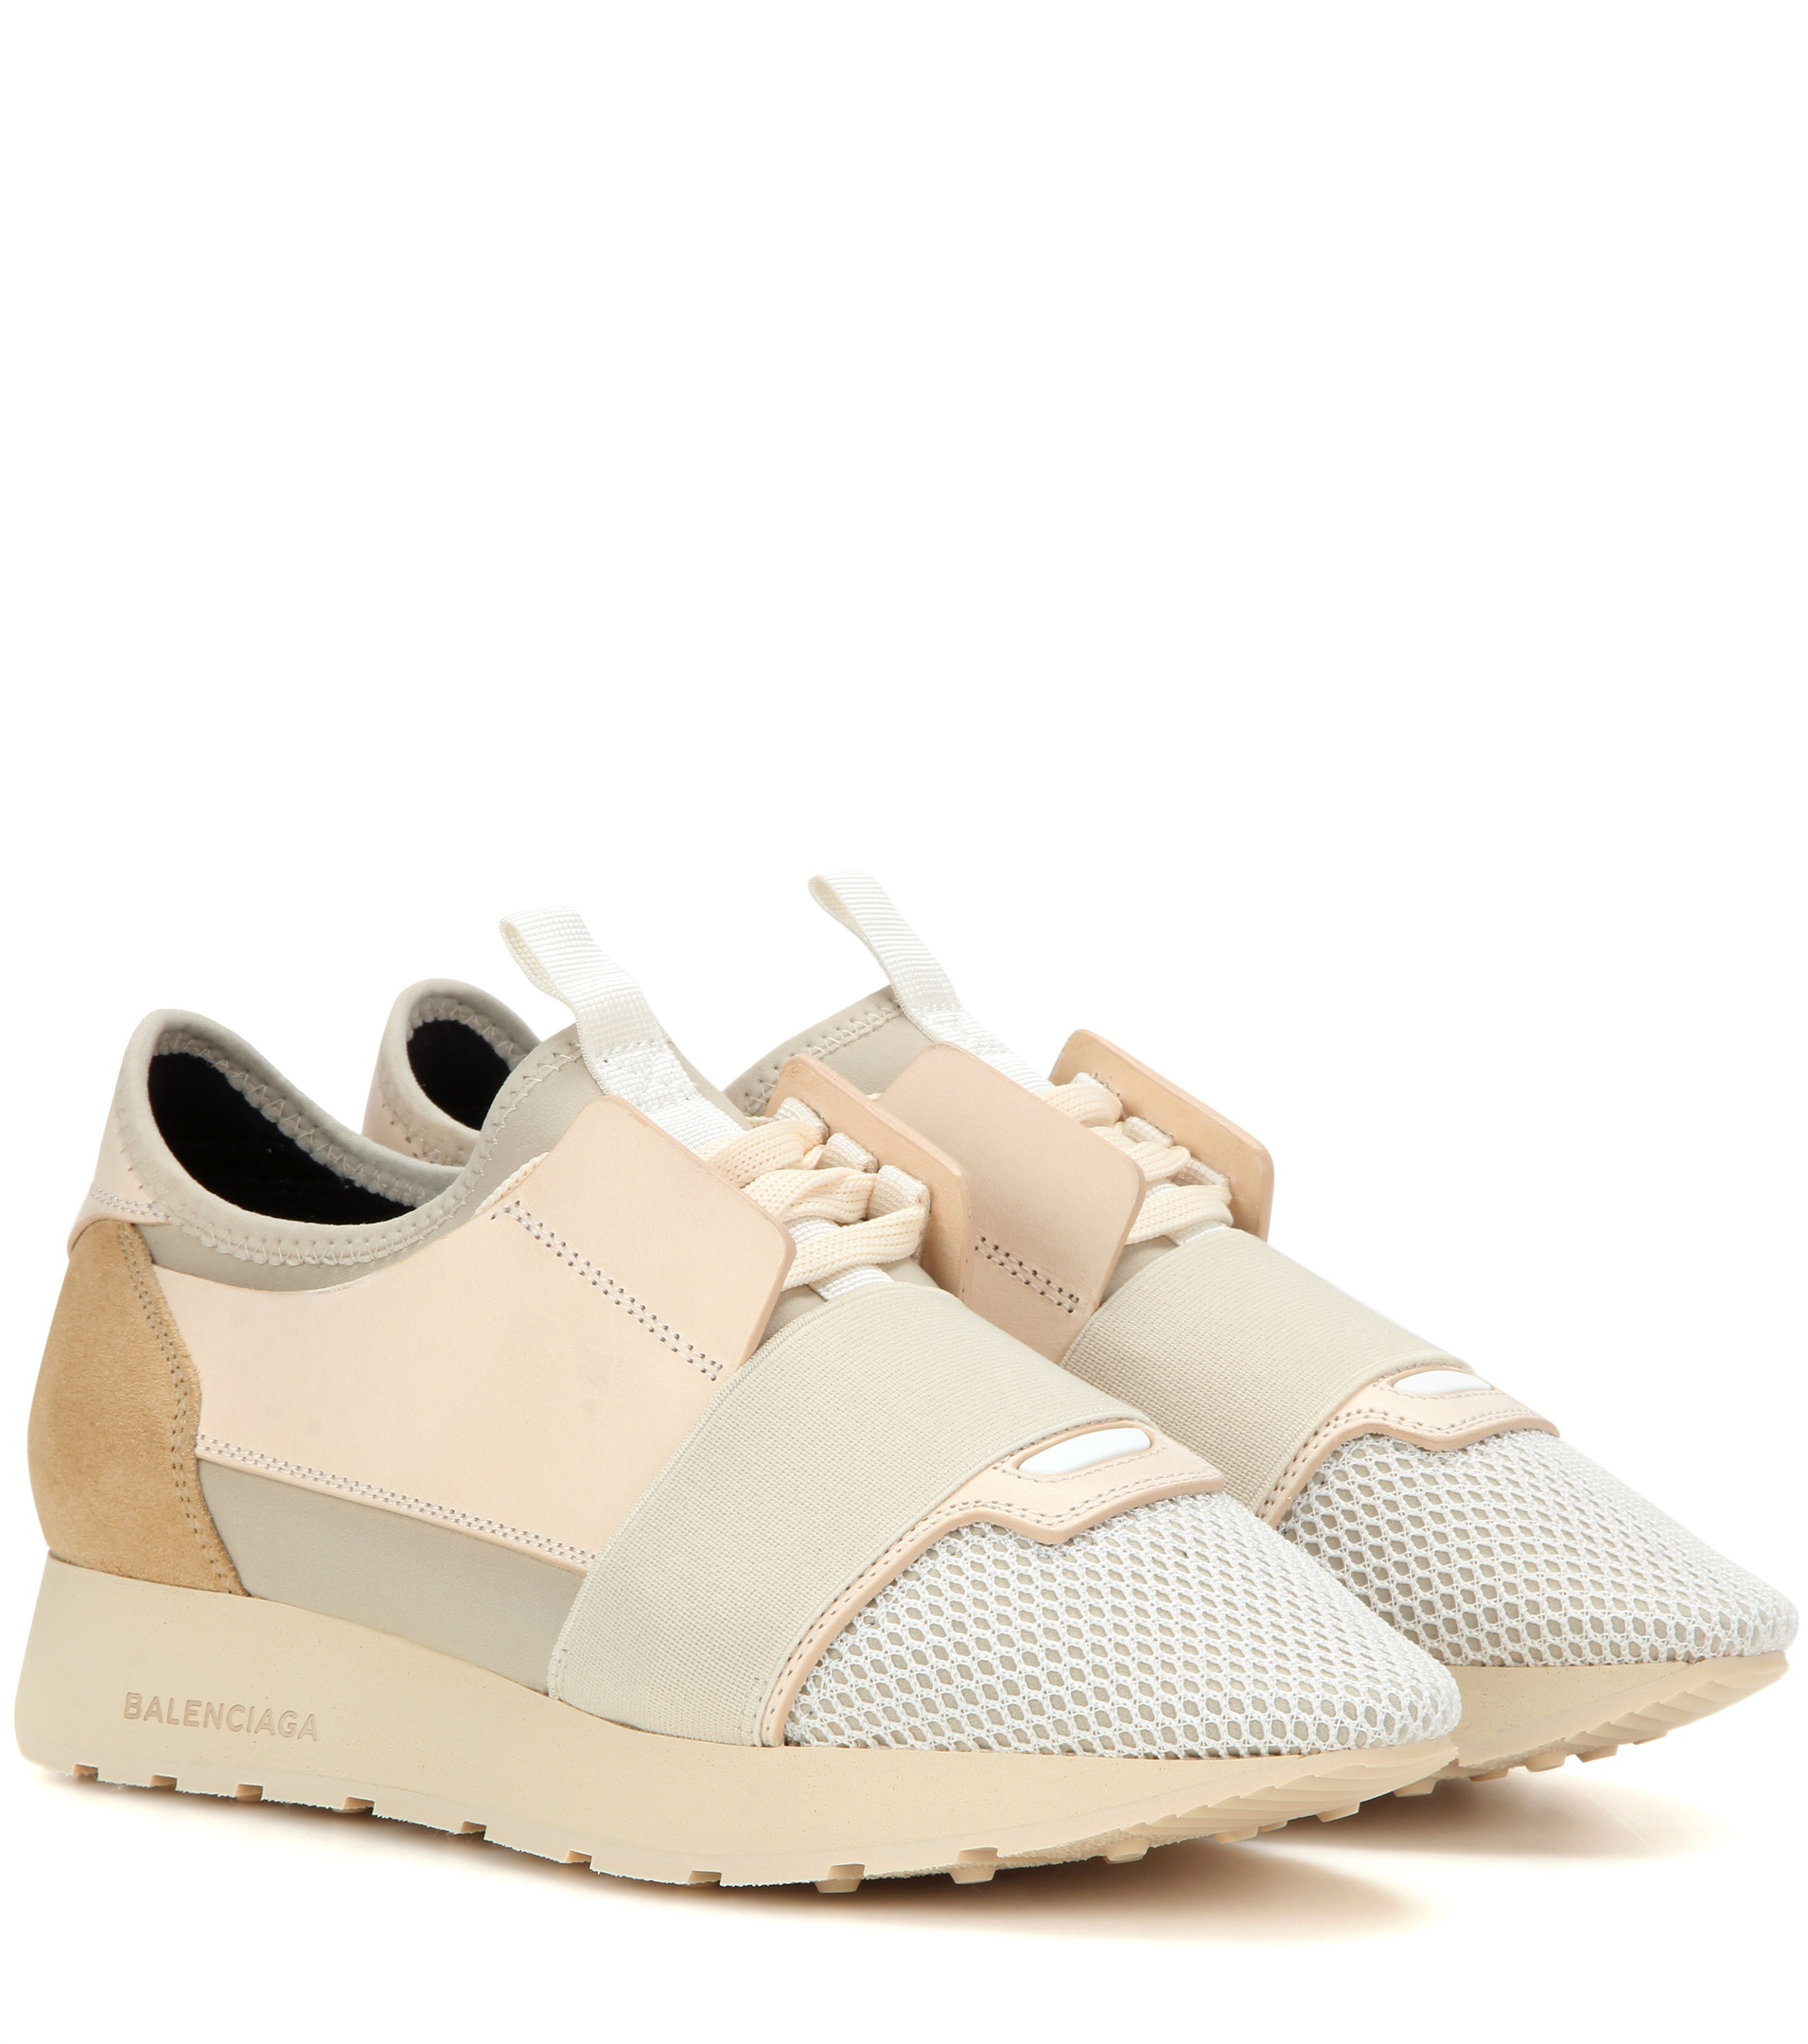 Lyst - Balenciaga Race Runner Leather And Suede Sneakers in Natural